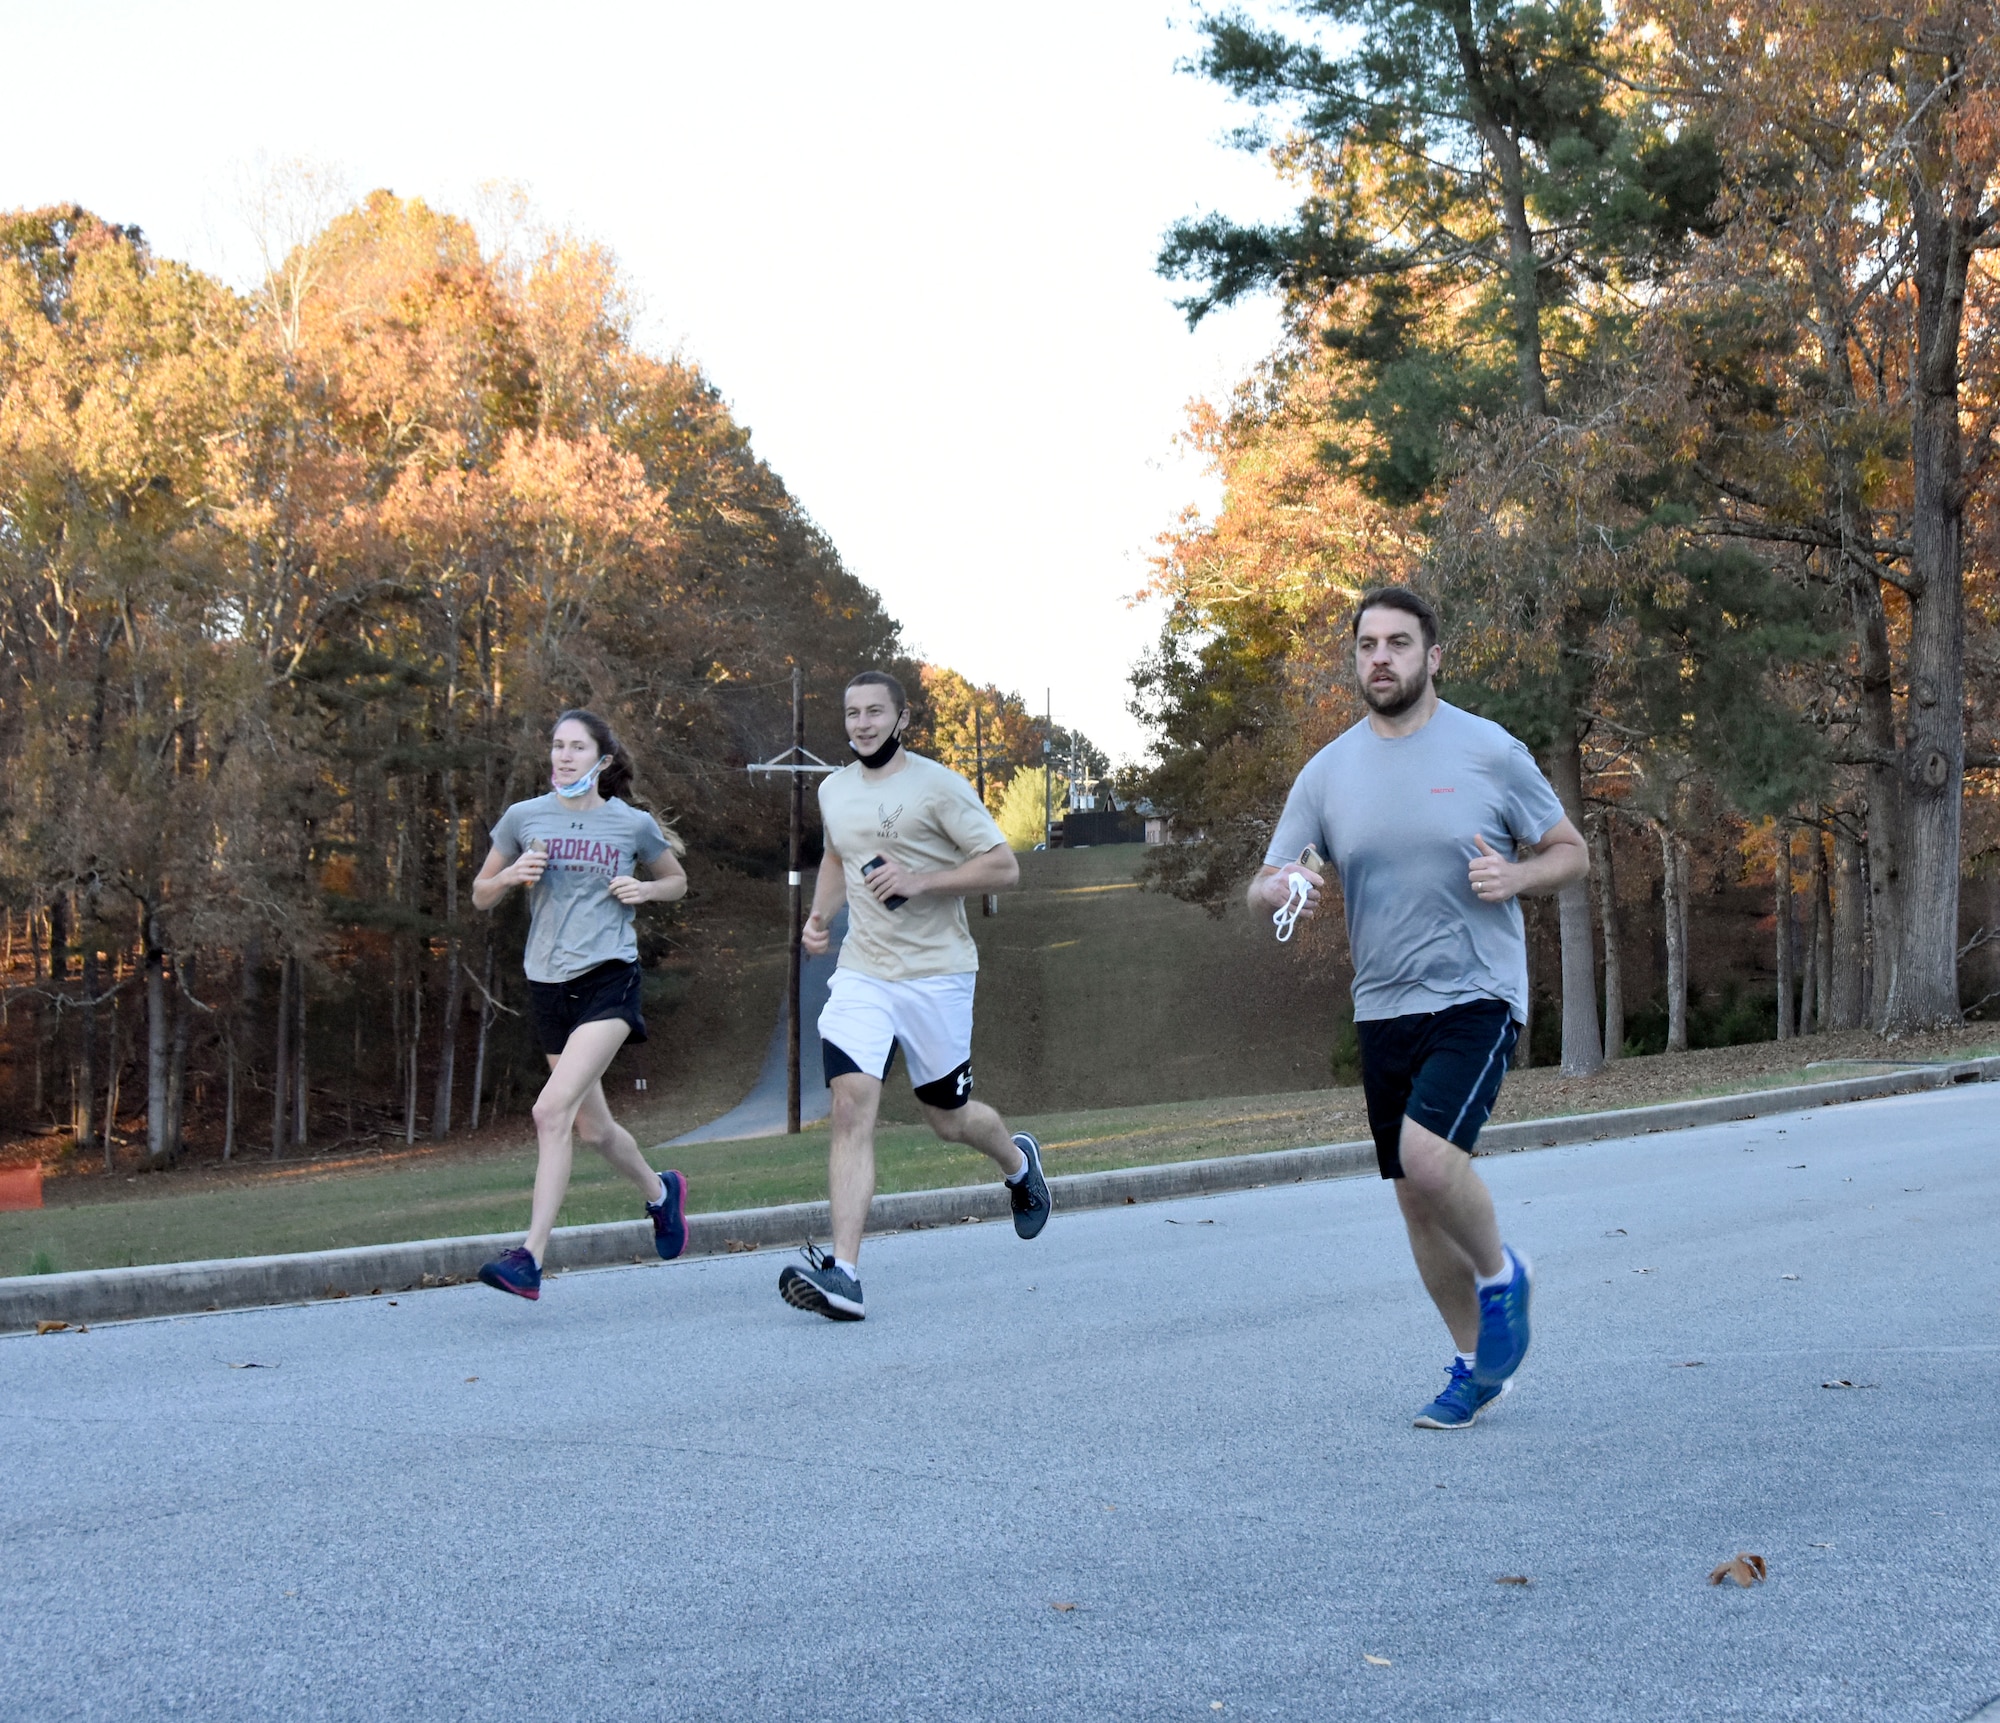 Bridget White, left, Lt. Paul McCormack, center and Ben Holton make their way through the course during the 35th annual AEDC Turkey Trot, held Nov. 13, 2020, at the Arnold Lakeside Center on Arnold Air Force Base, Tenn. (U.S. Air Force photo by Bradley Hicks)